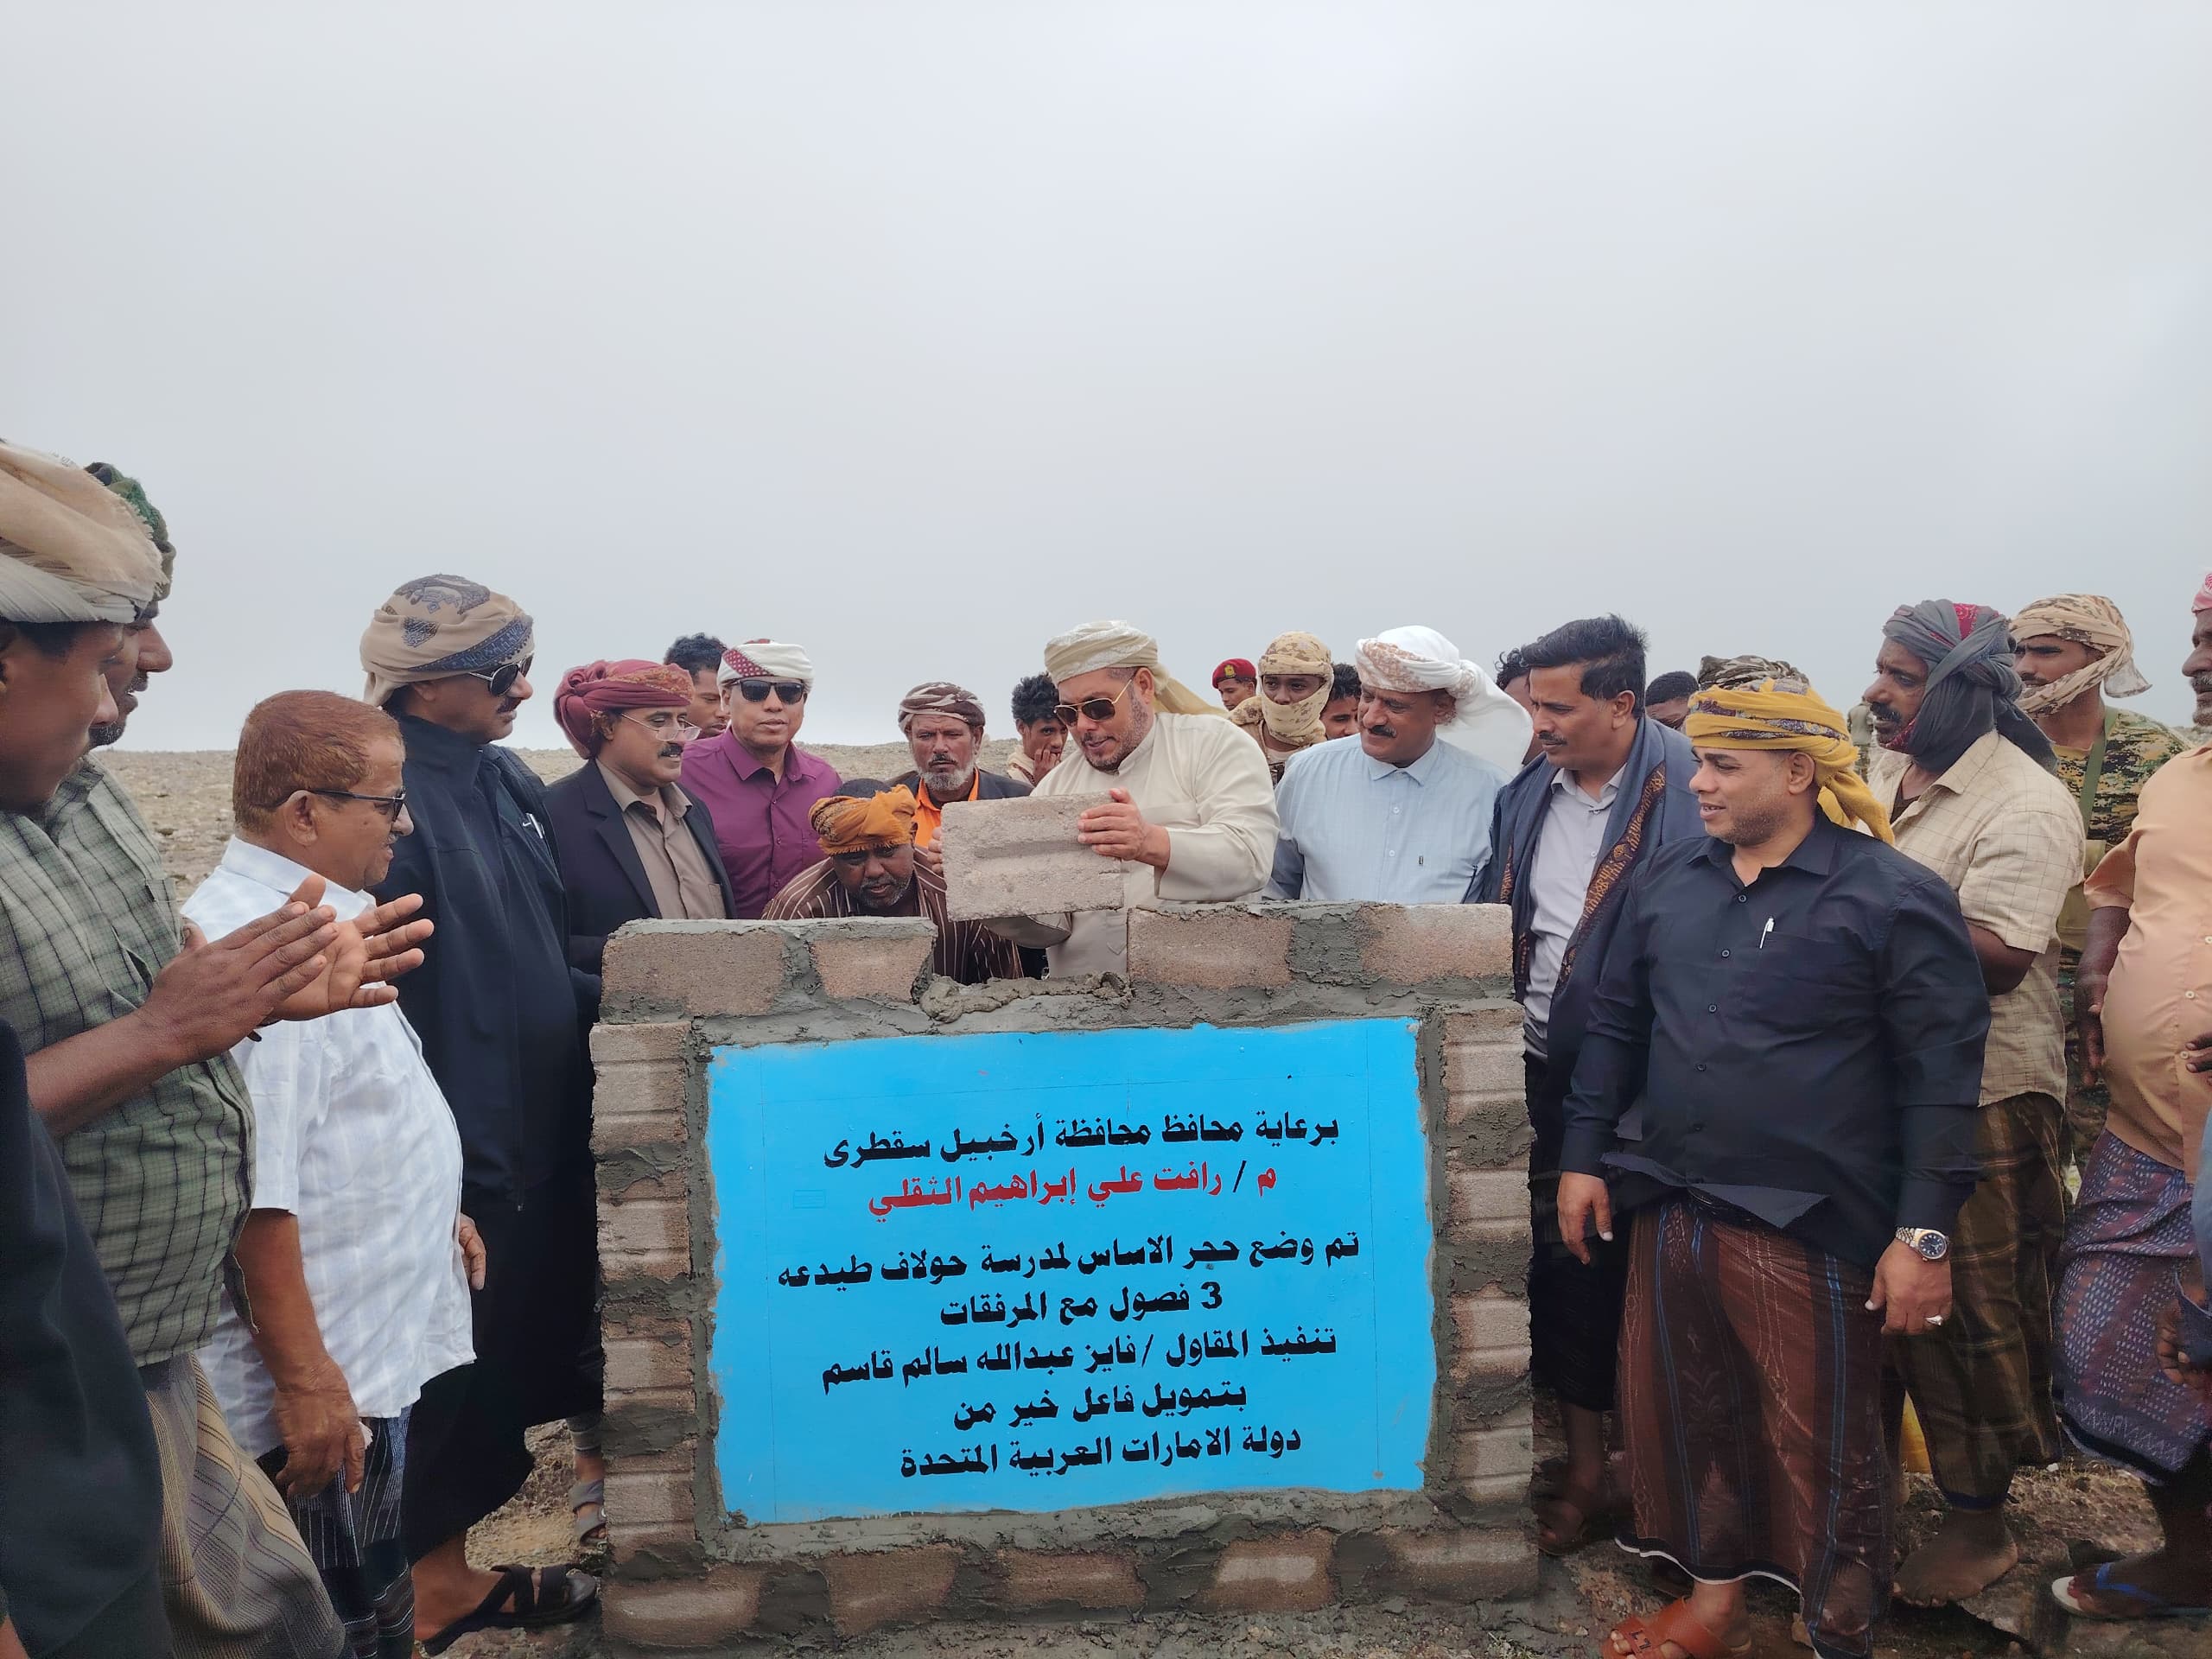 Foundation Stone Laid for a New Primary School in Diksam, Socotra